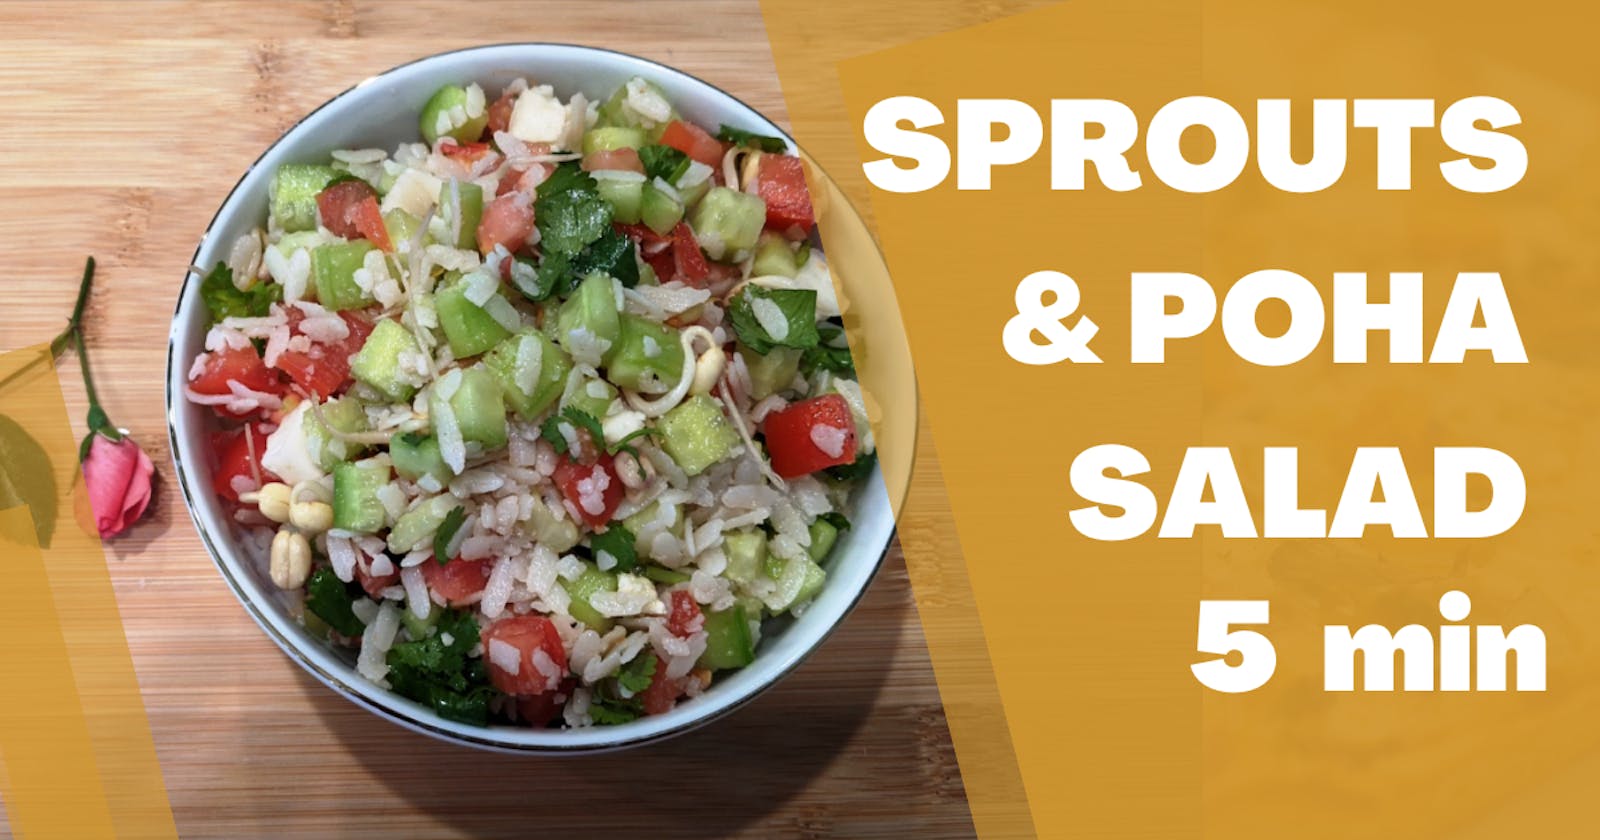 Sprouts and Poha Salad (A Taste of Isha)